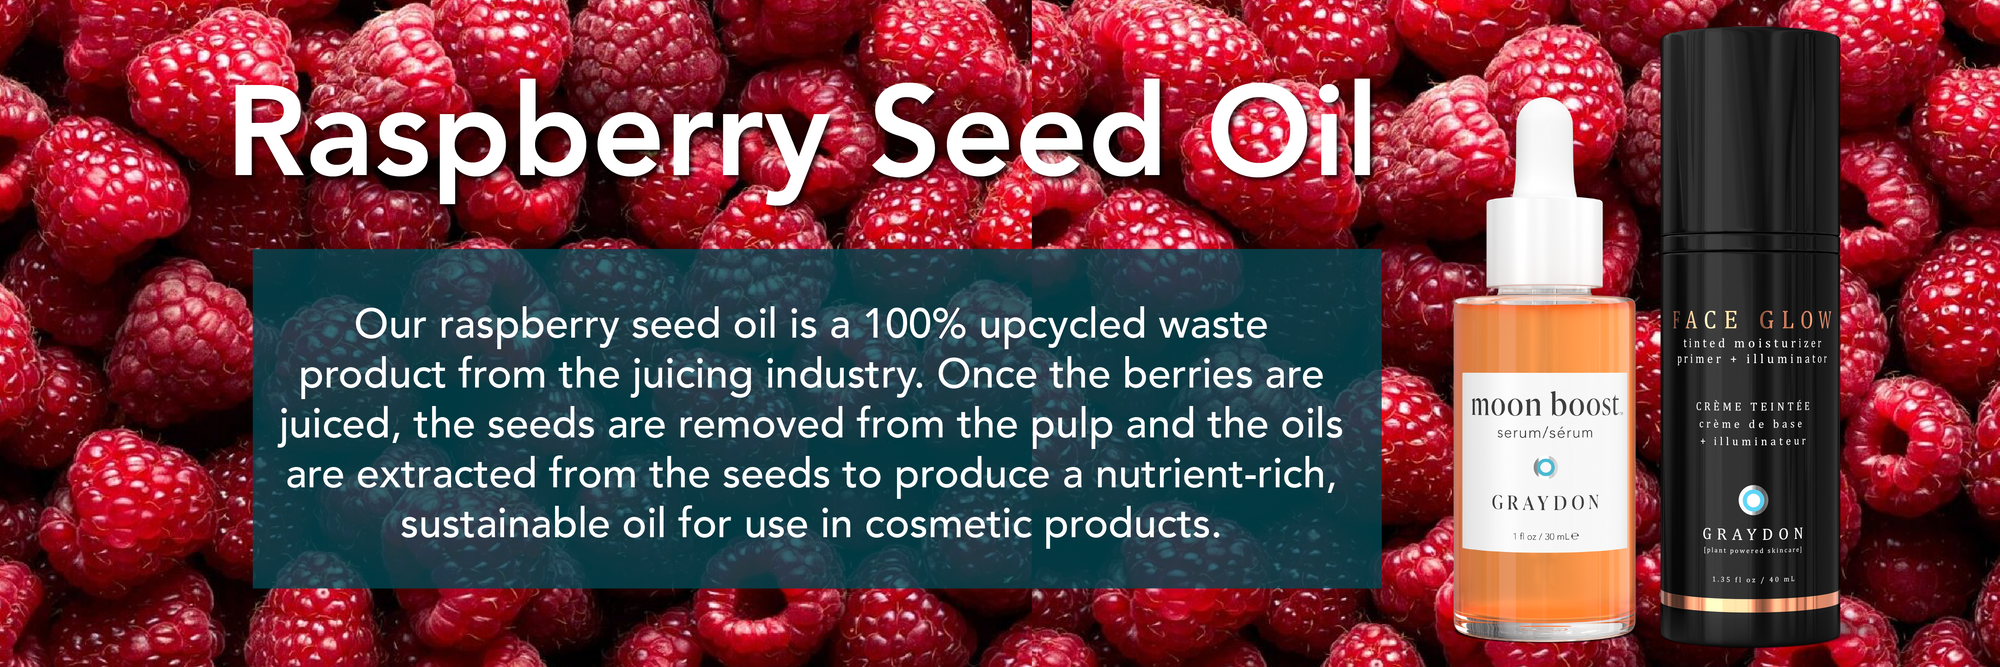 Raspberry seed oil: Our raspberry seed oil is a 100% upcycled waste product from the juicing industry. Once the berries are juiced, the seeds are removed from the pulp and the oils are extracted from the seeds to produce a nutrient-rich, sustainable oil for use in cosmetic products.